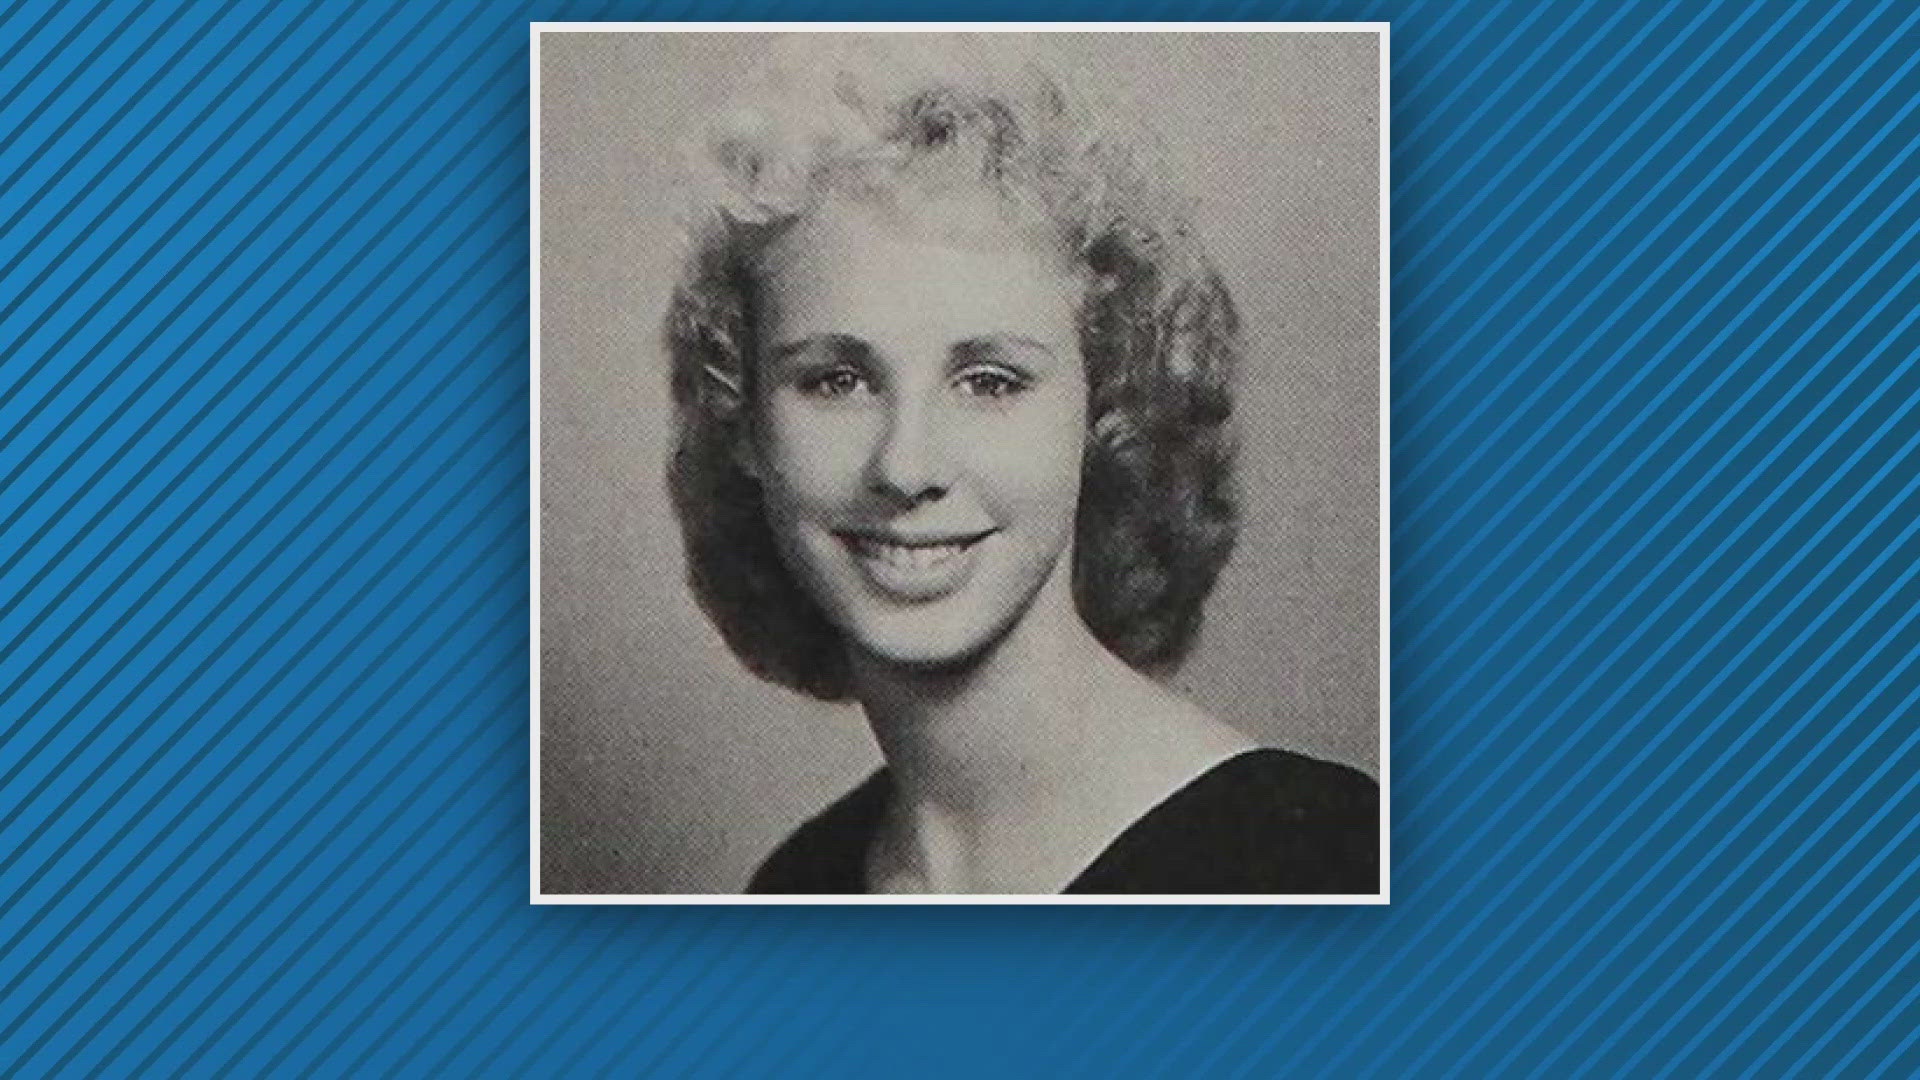 The bones of a homicide victim were found on Crescent Beach in 1985. The St. Johns County Sheriff's Office announced Thursday that they identified the victim.